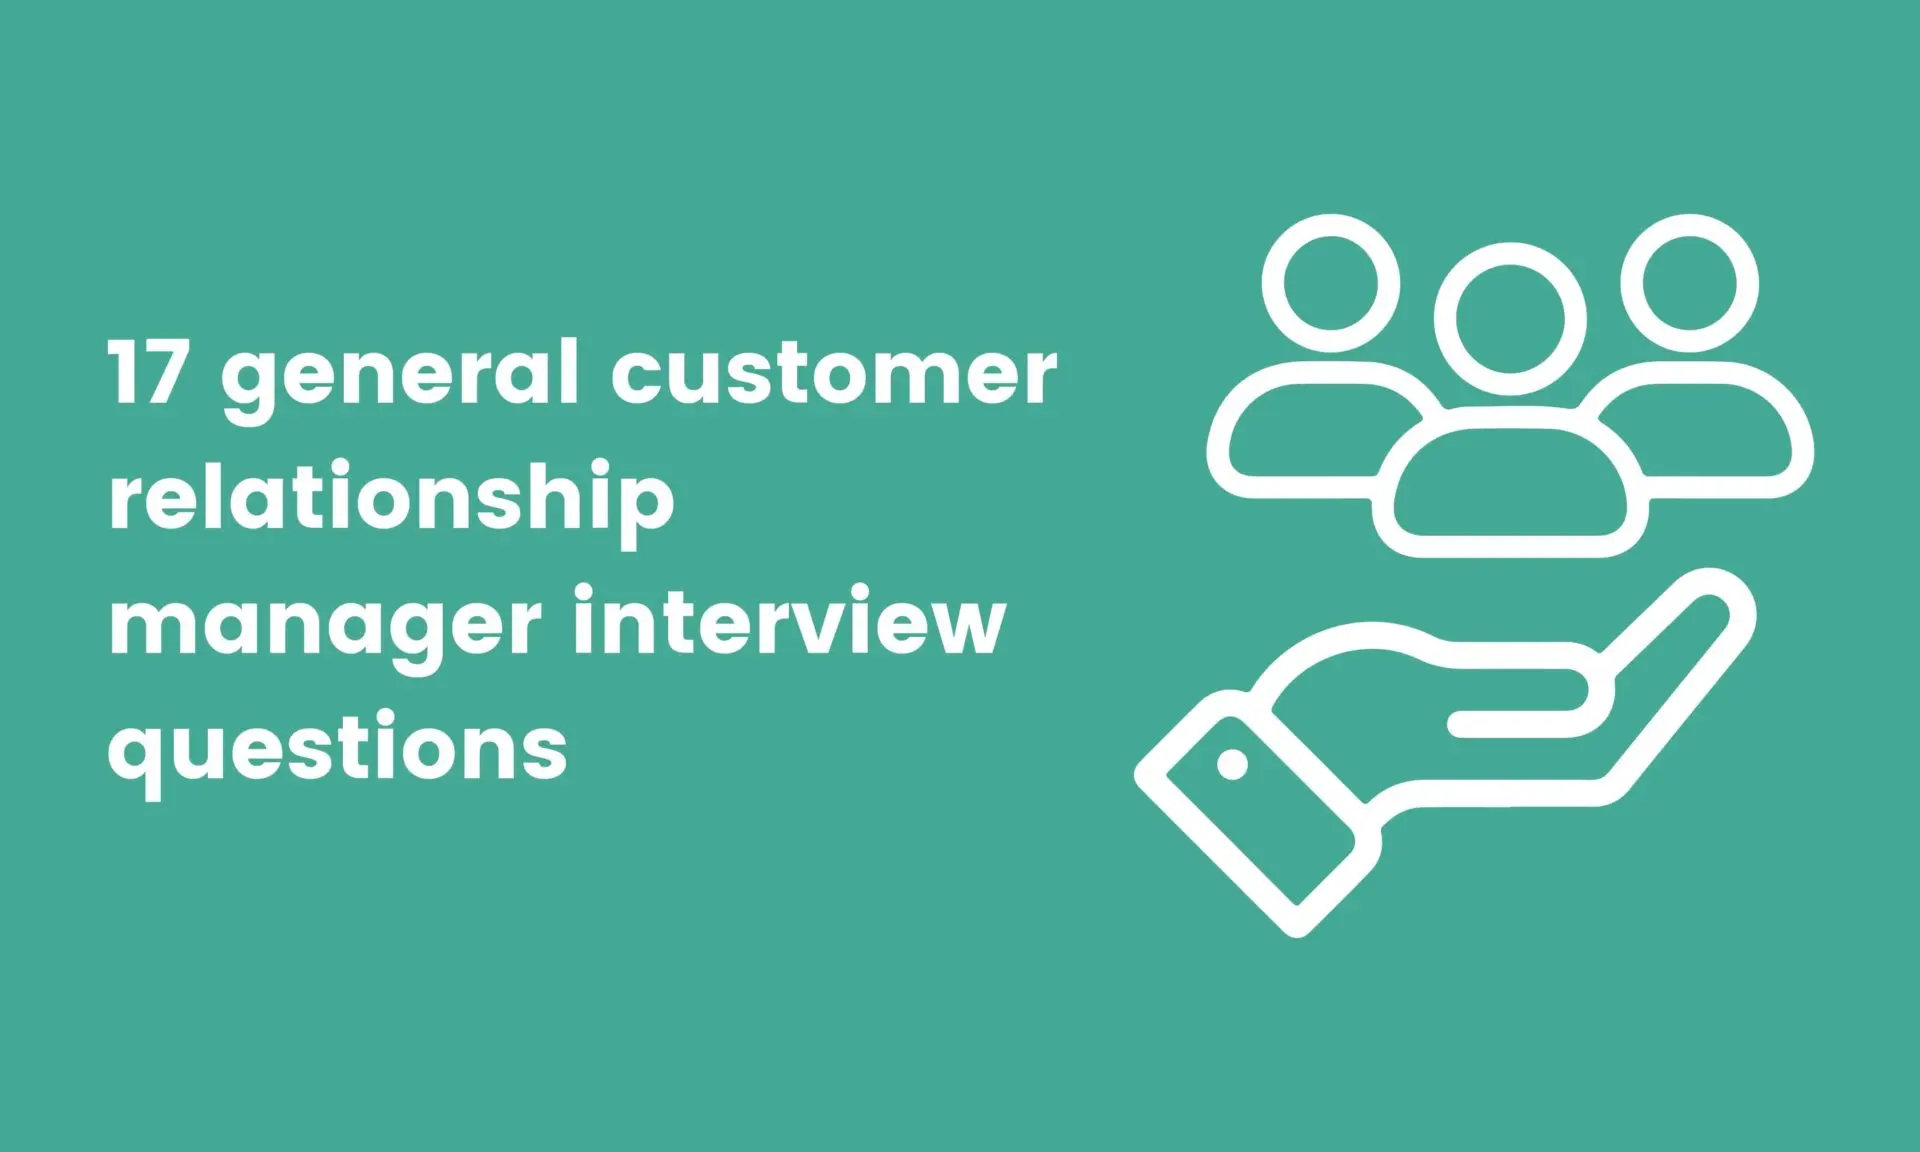 17 general customer relationship manager interview questions